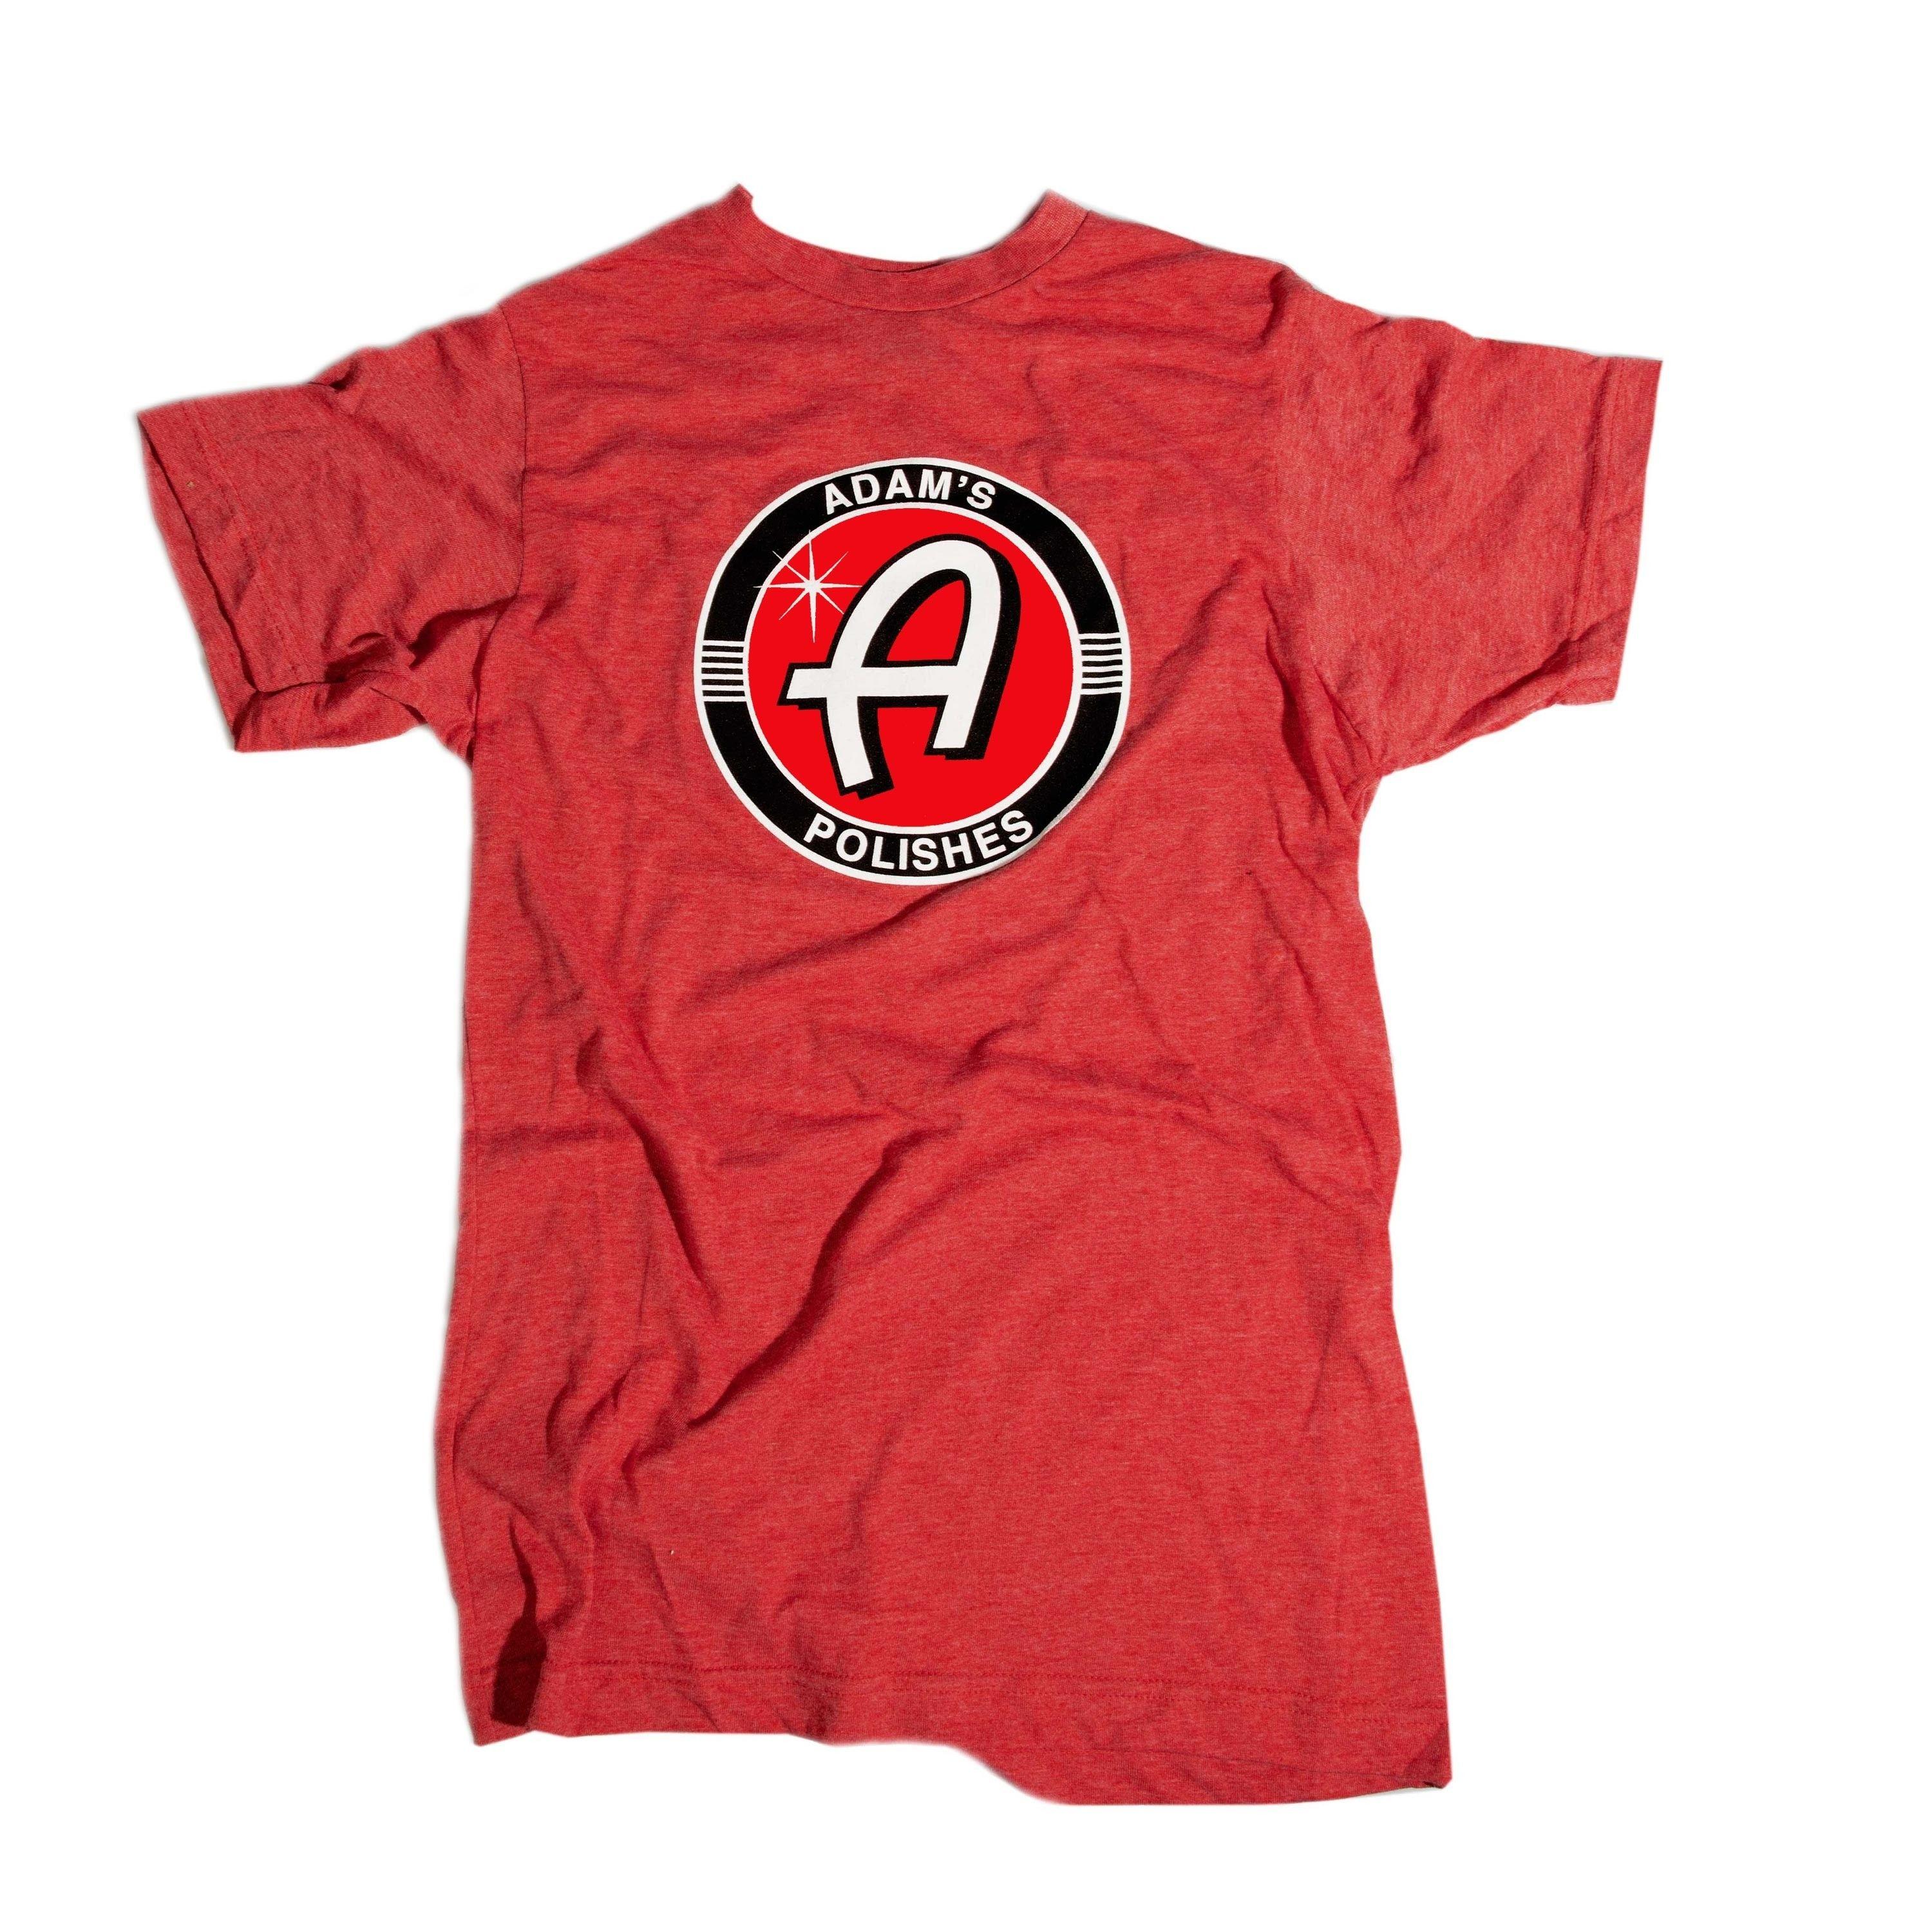 Red Clothing and Apparel Logo - Adam's Red Shirt with Classic Logo | Adam's Polishes Apparel